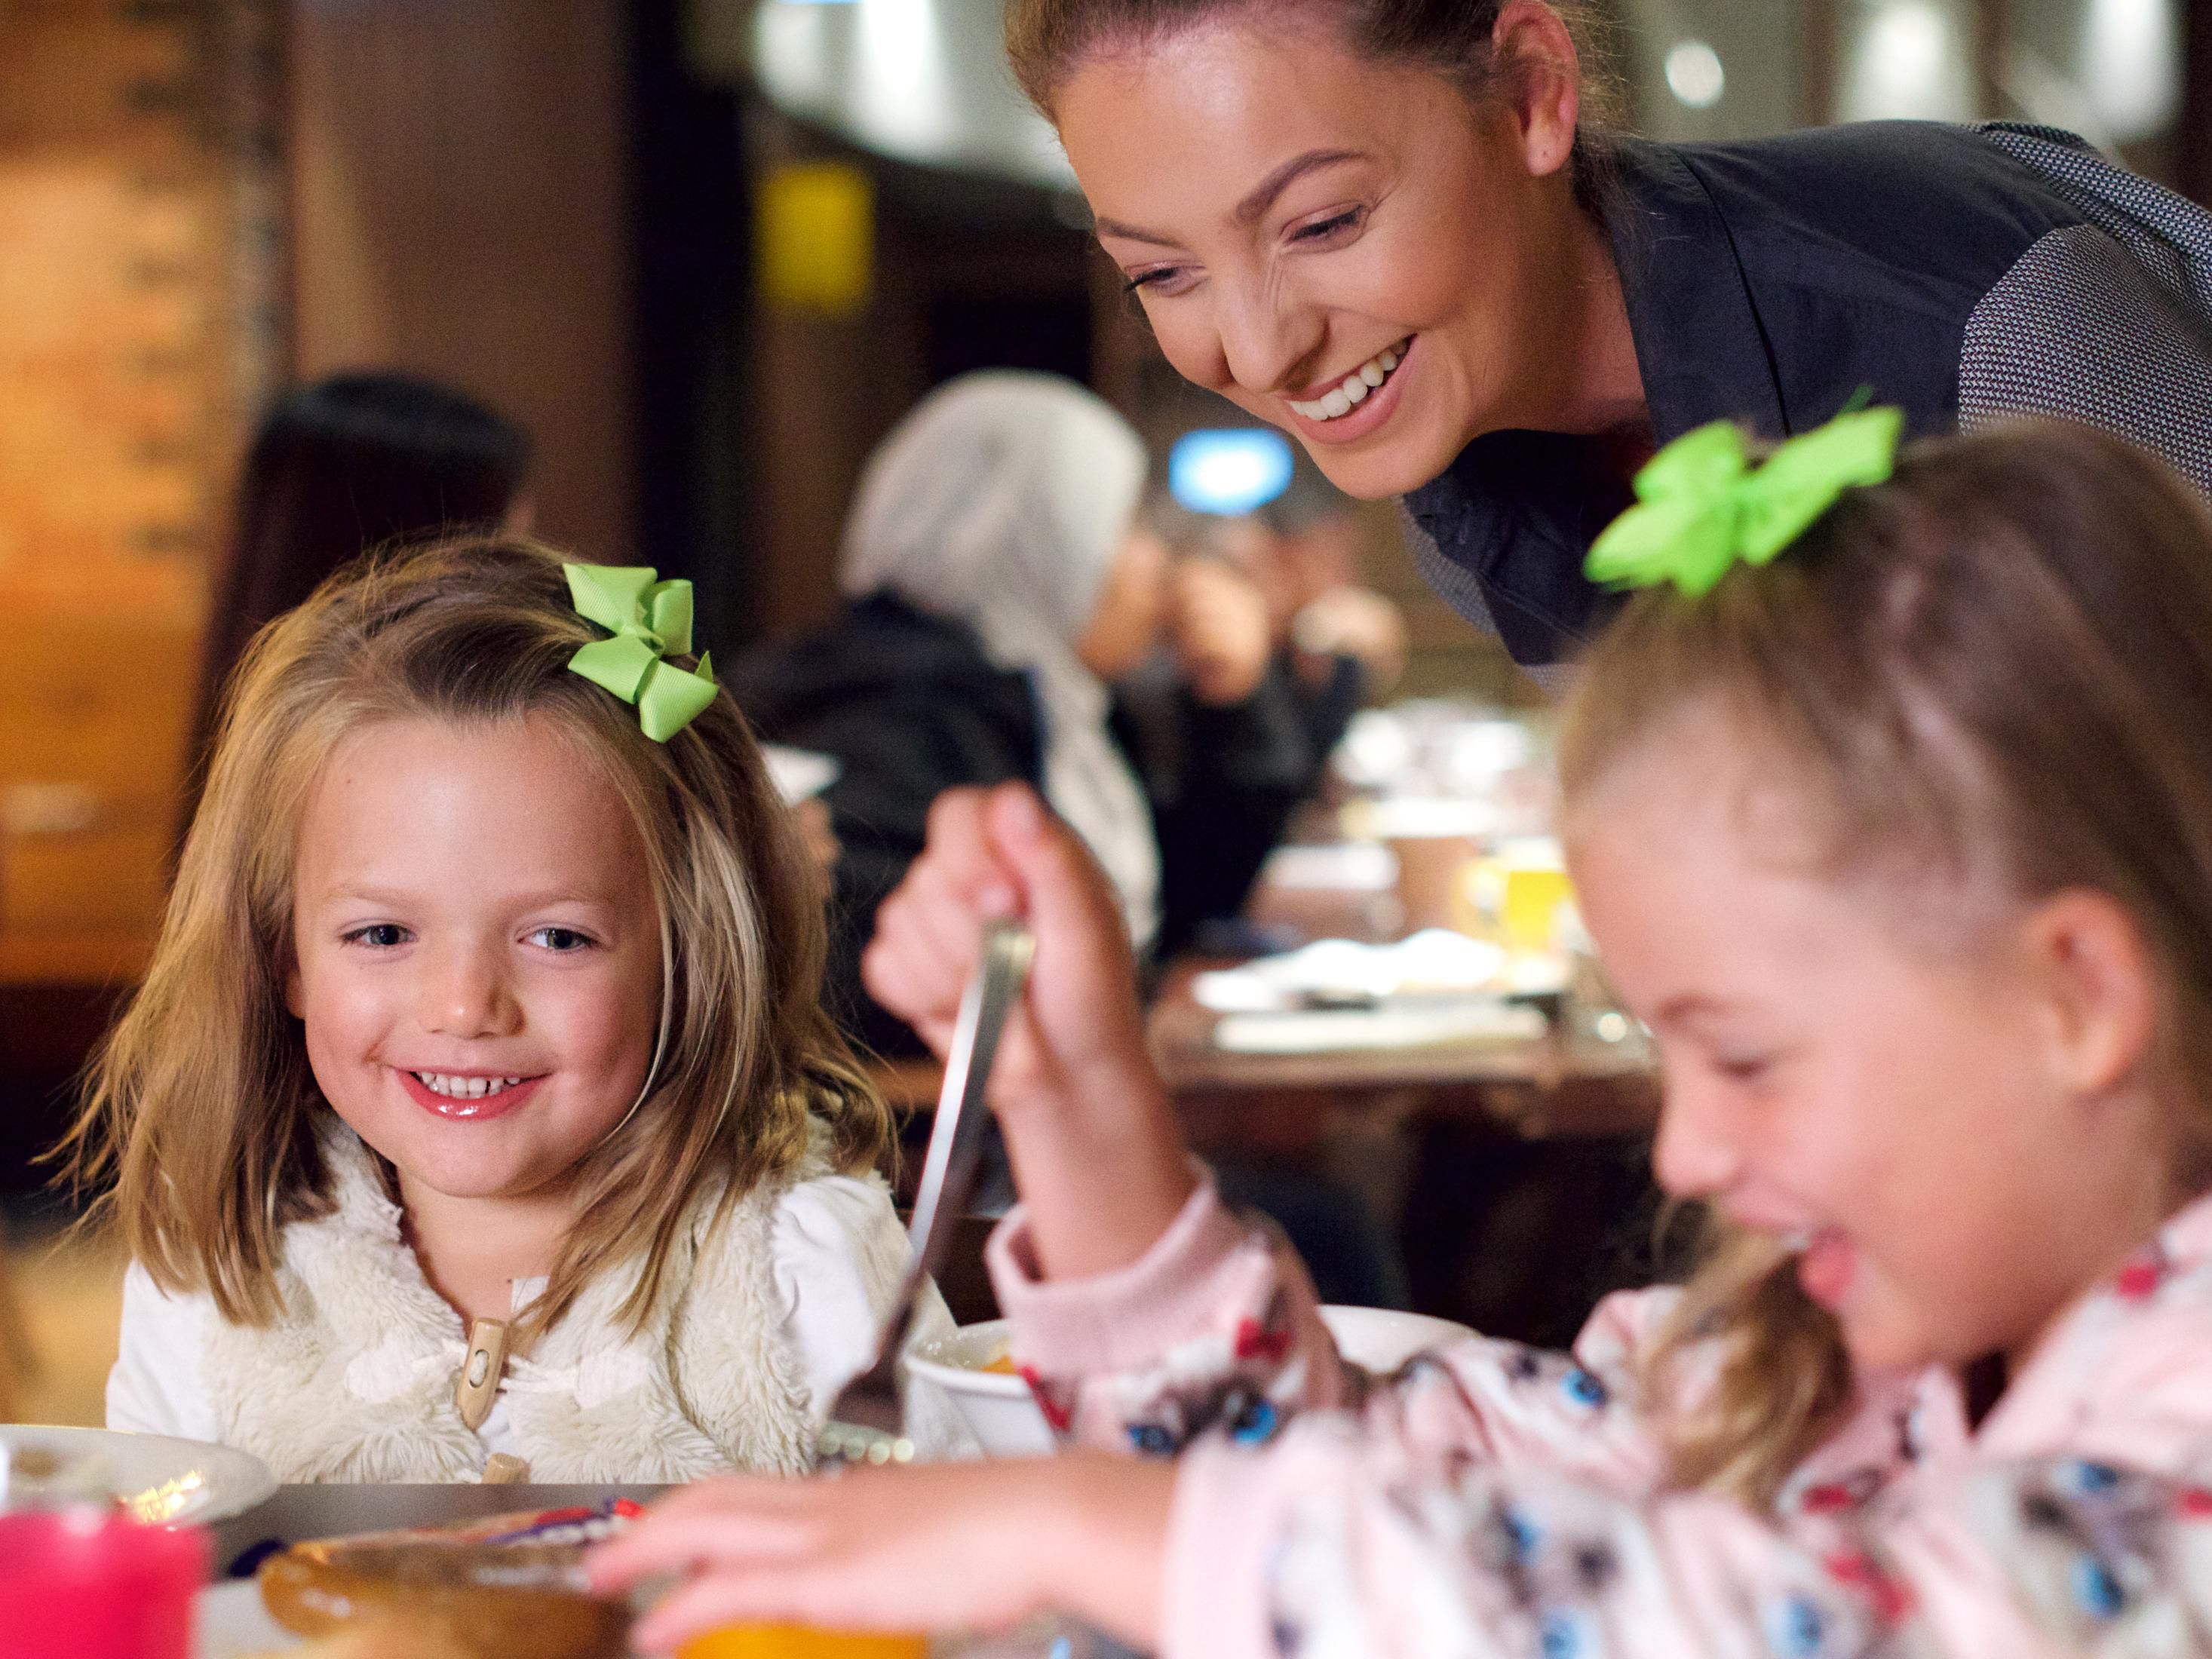 We welcome kids with open arms and help families save money with our Kids Stay & Eat Free* guarantee. Kids eat free at breakfast, lunch and dinner when dining with an adult. Plus to make your stay even more affordable, kids aged 12 and under stay for free when sharing their parents’ room.